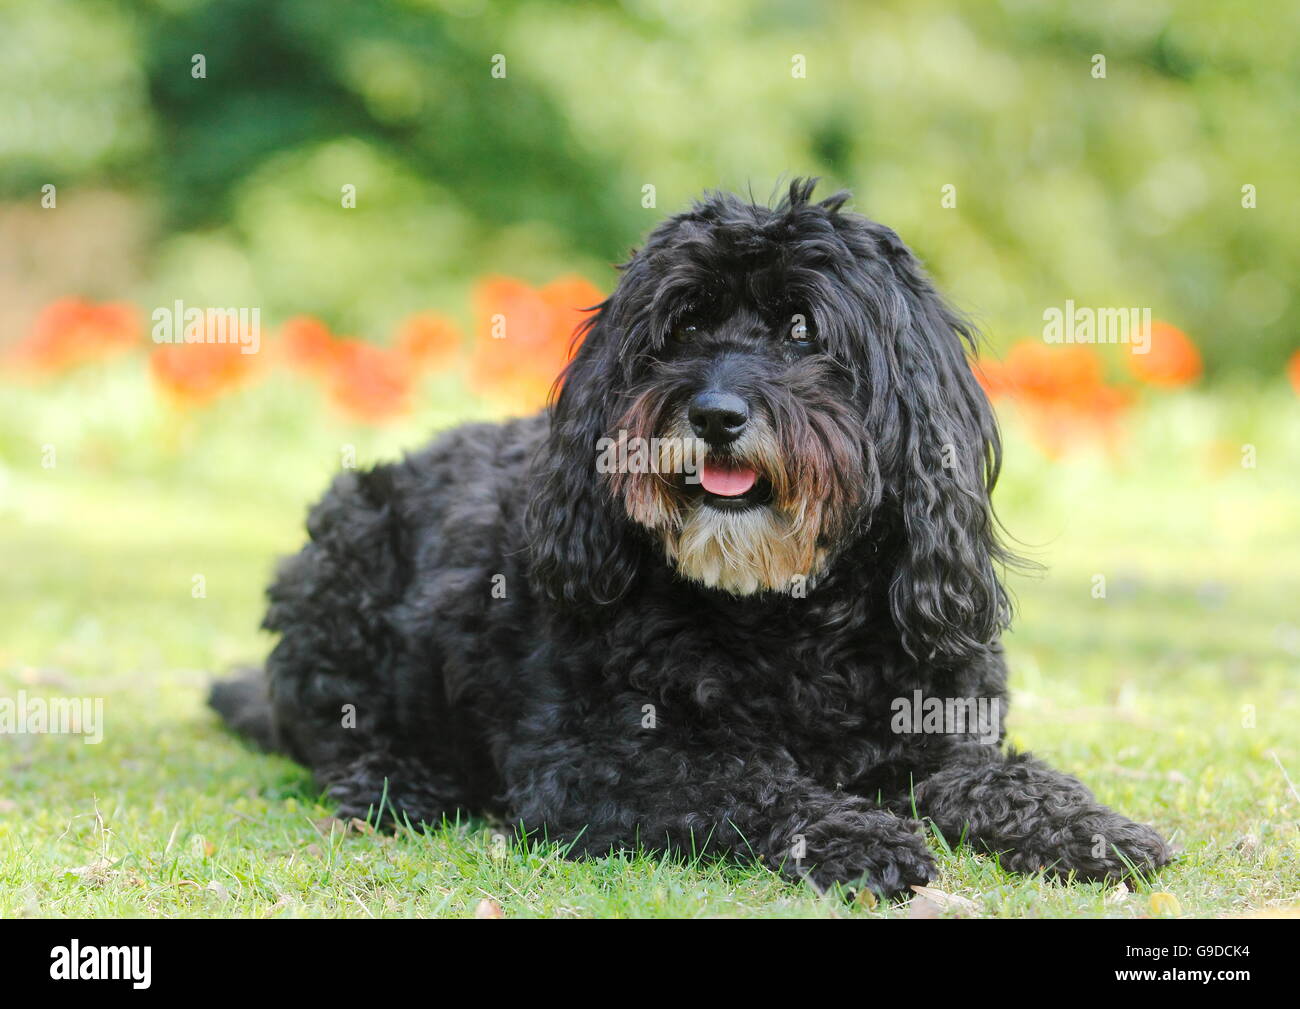 bouvier and poodle mix